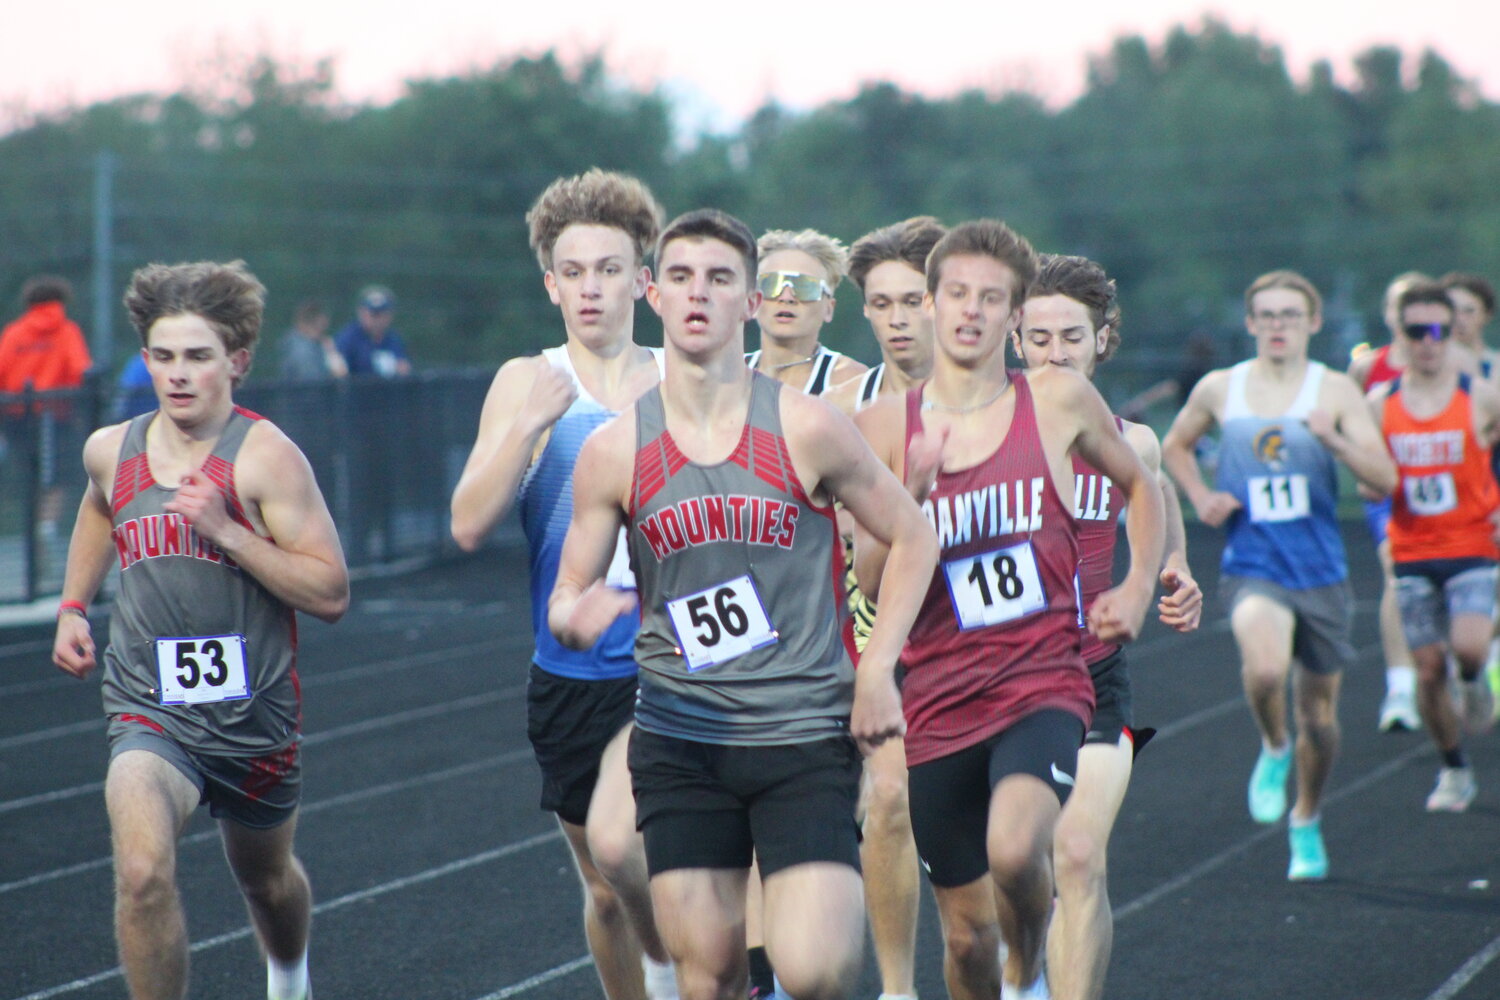 Southmont's Vince Reimondo was a three-time event winner with wins in the 800, 4x400, and 4x800.